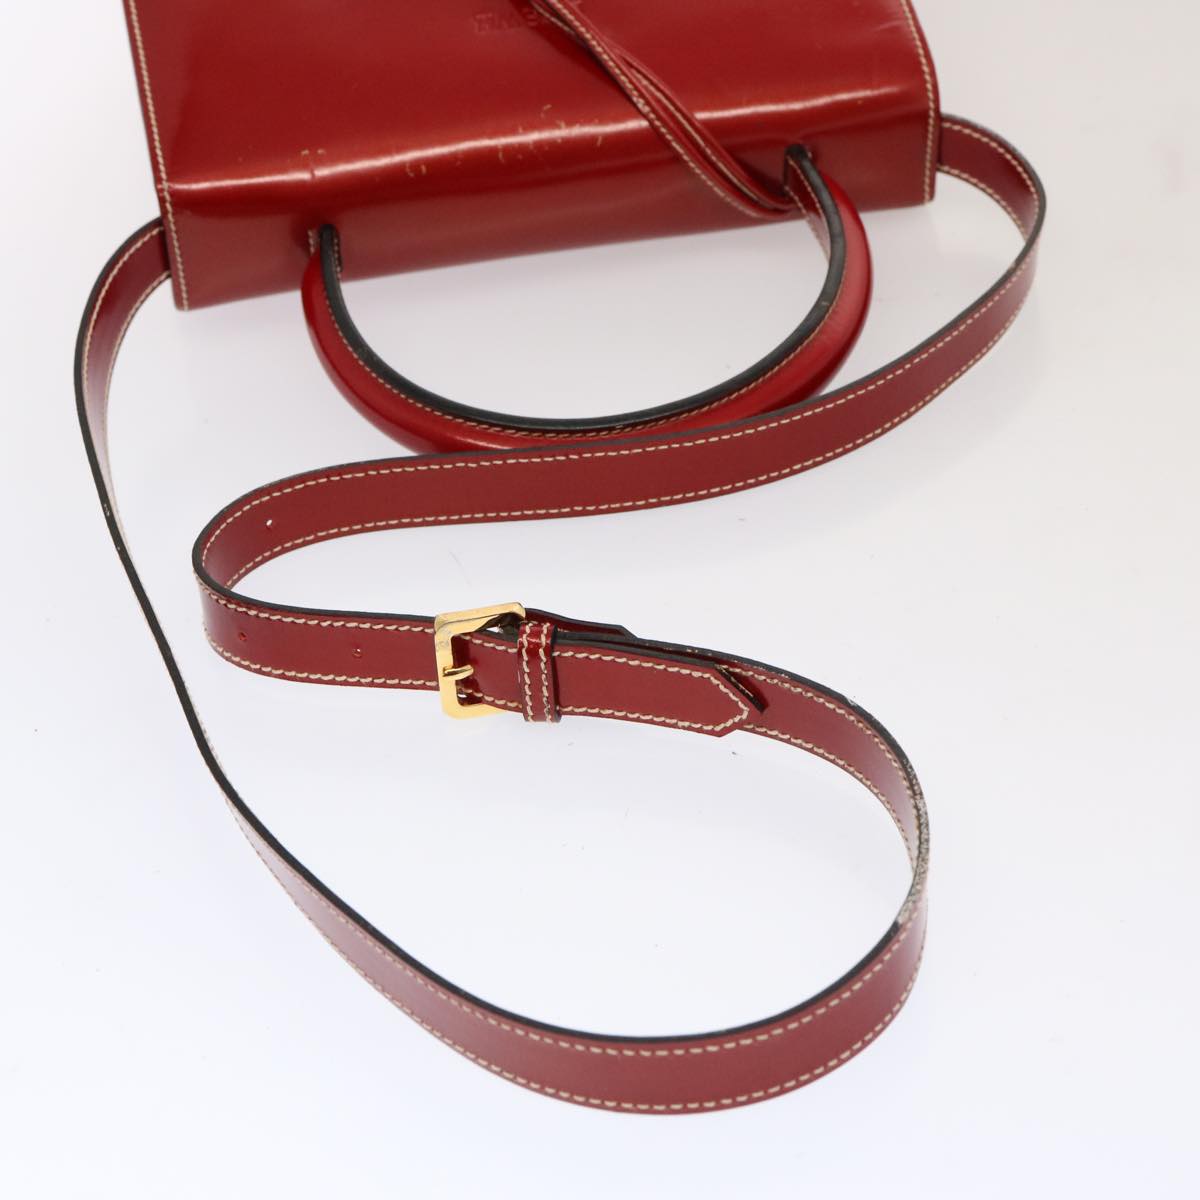 LOEWE Hand Bag Patent leather 2way Red Auth 69418